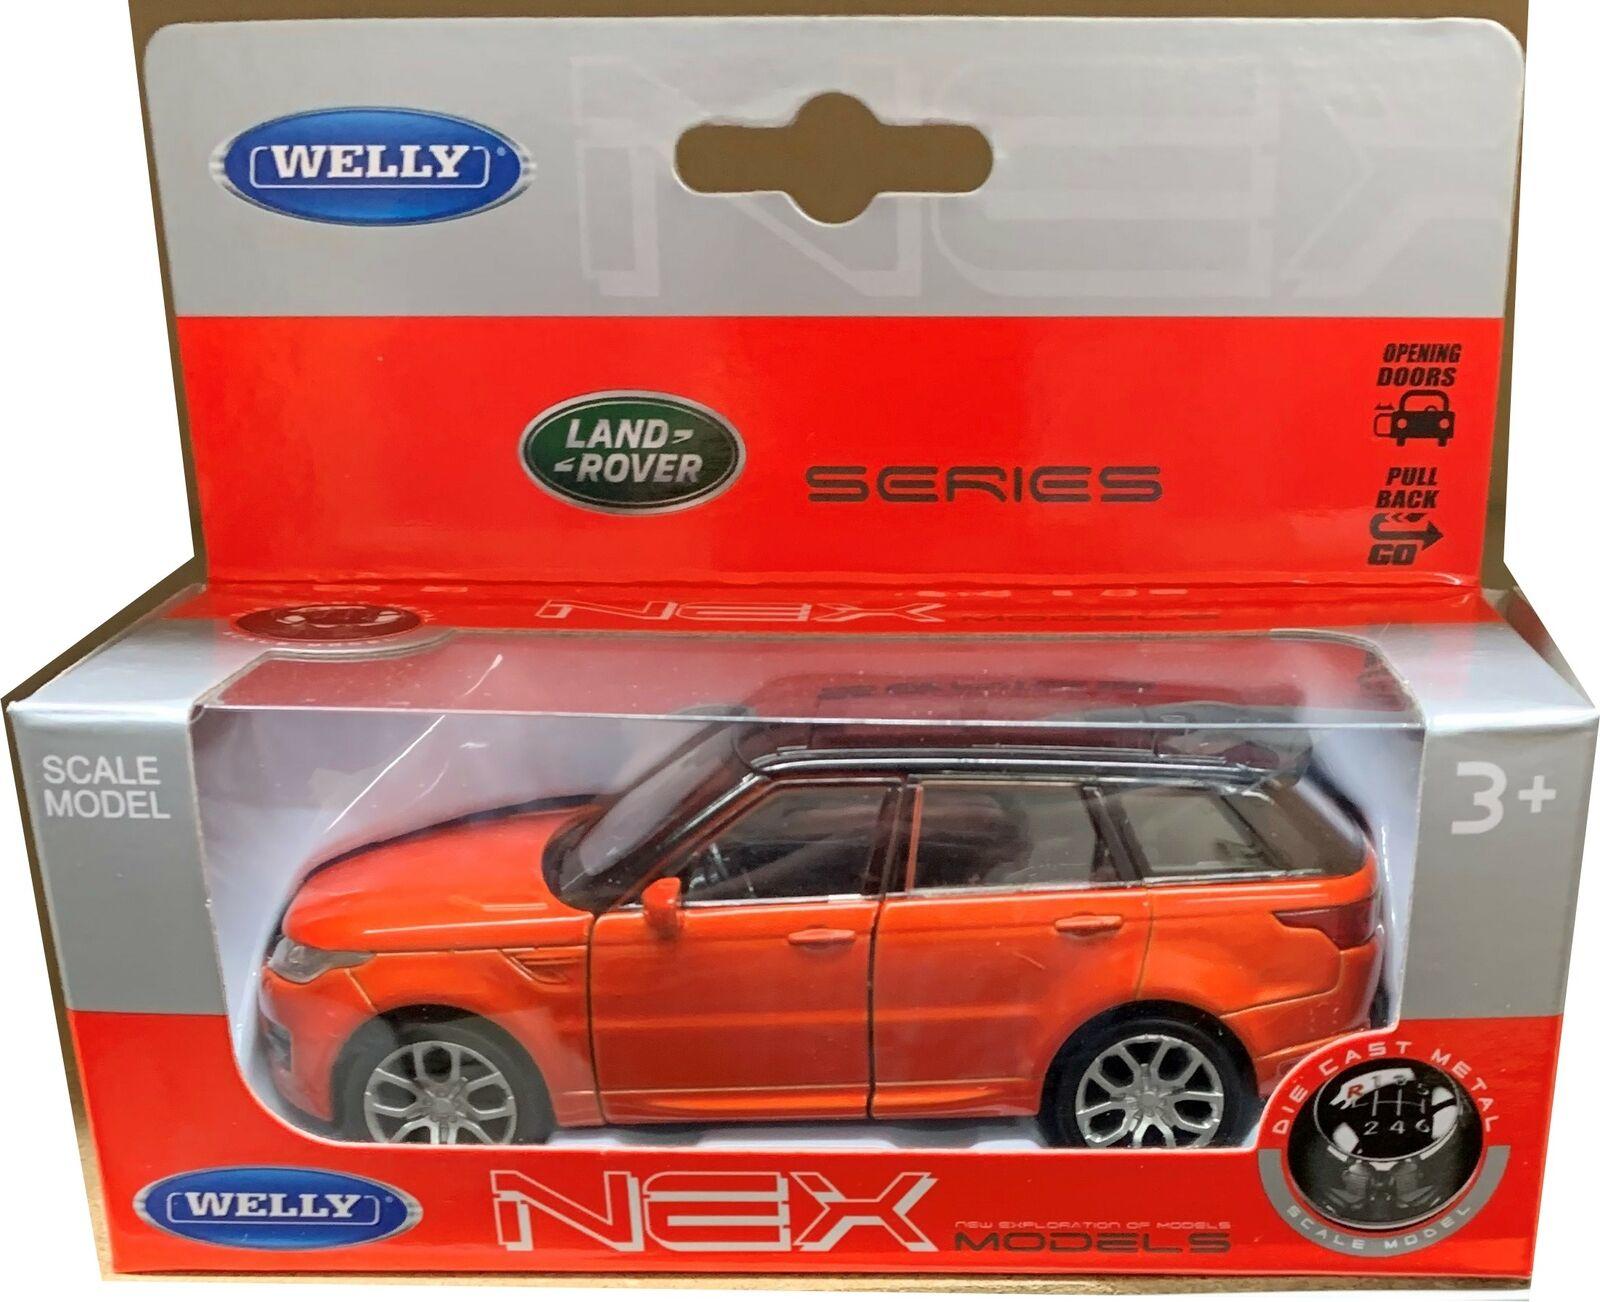 Range Rover Sport in red / black 1:43 scale diecast model from Welly